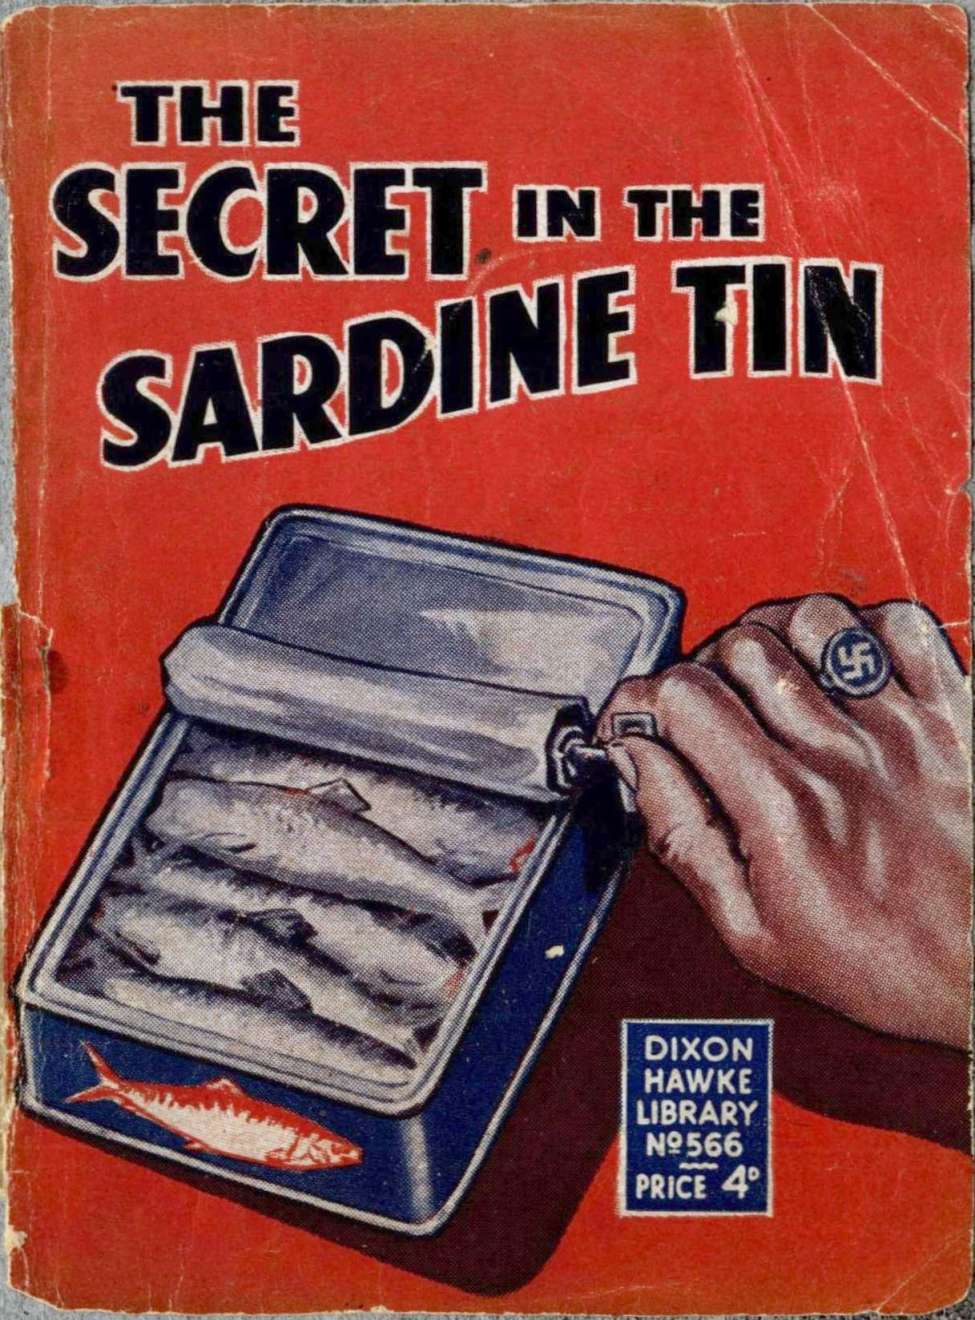 Book Cover For Dixon Hawke Library 566 - The Secret of the Sardine Tin